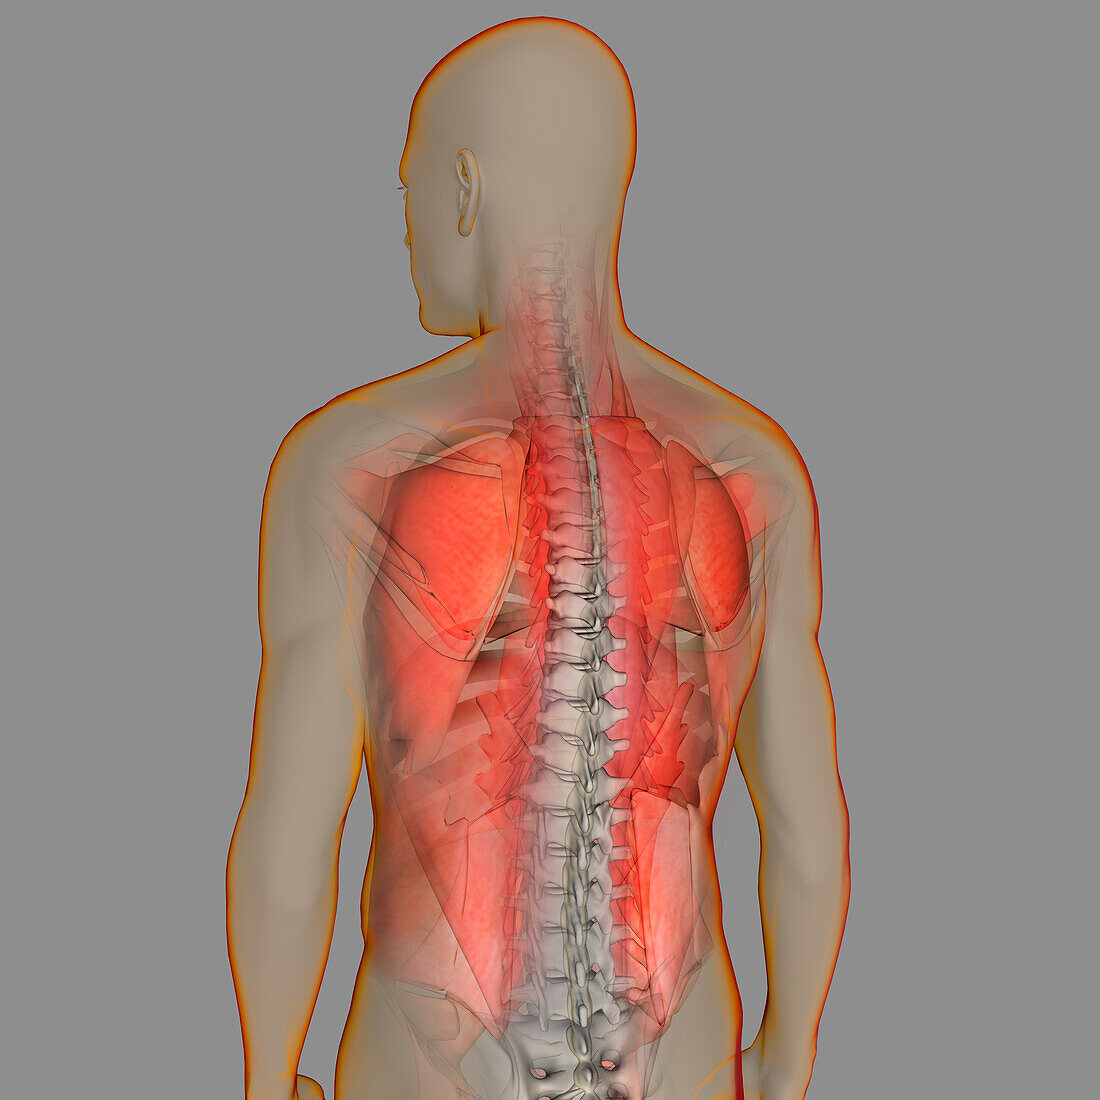 Male back muscles, illustration